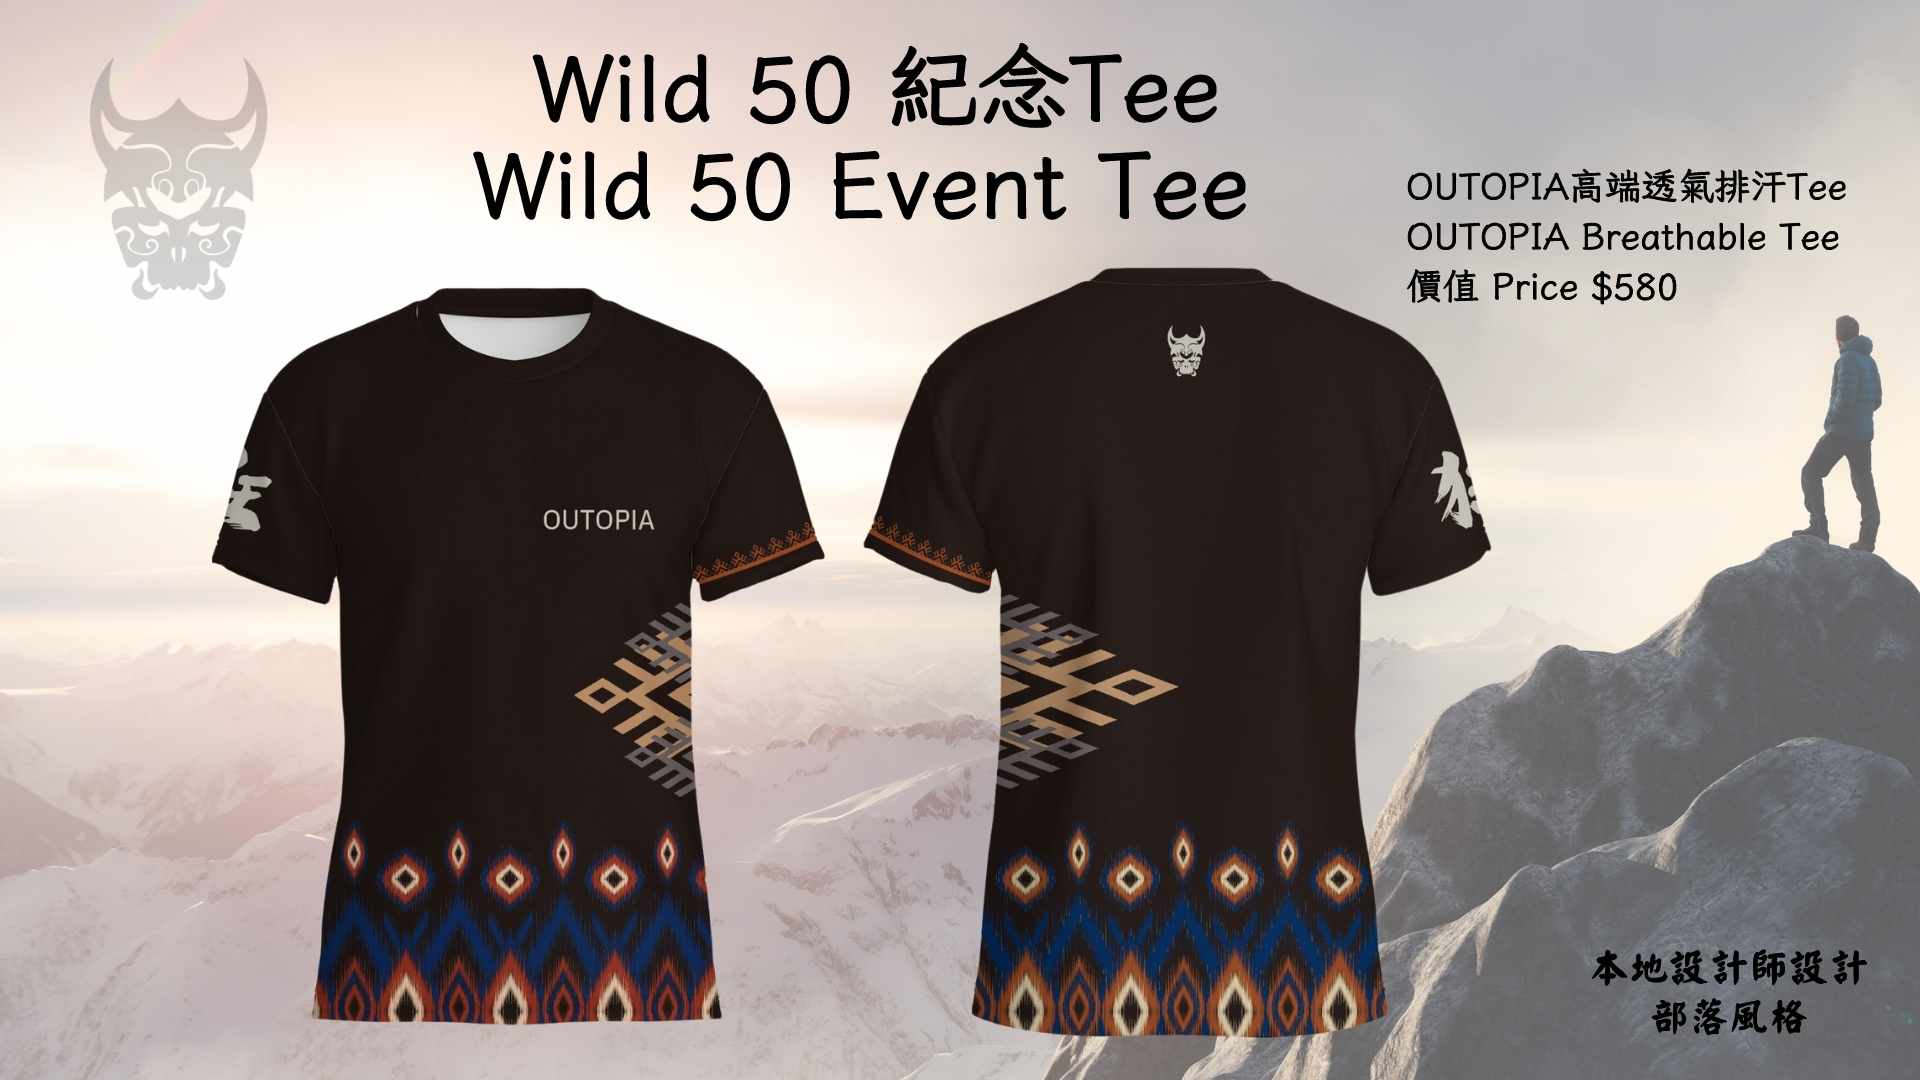 Wild 50 Free Gifts